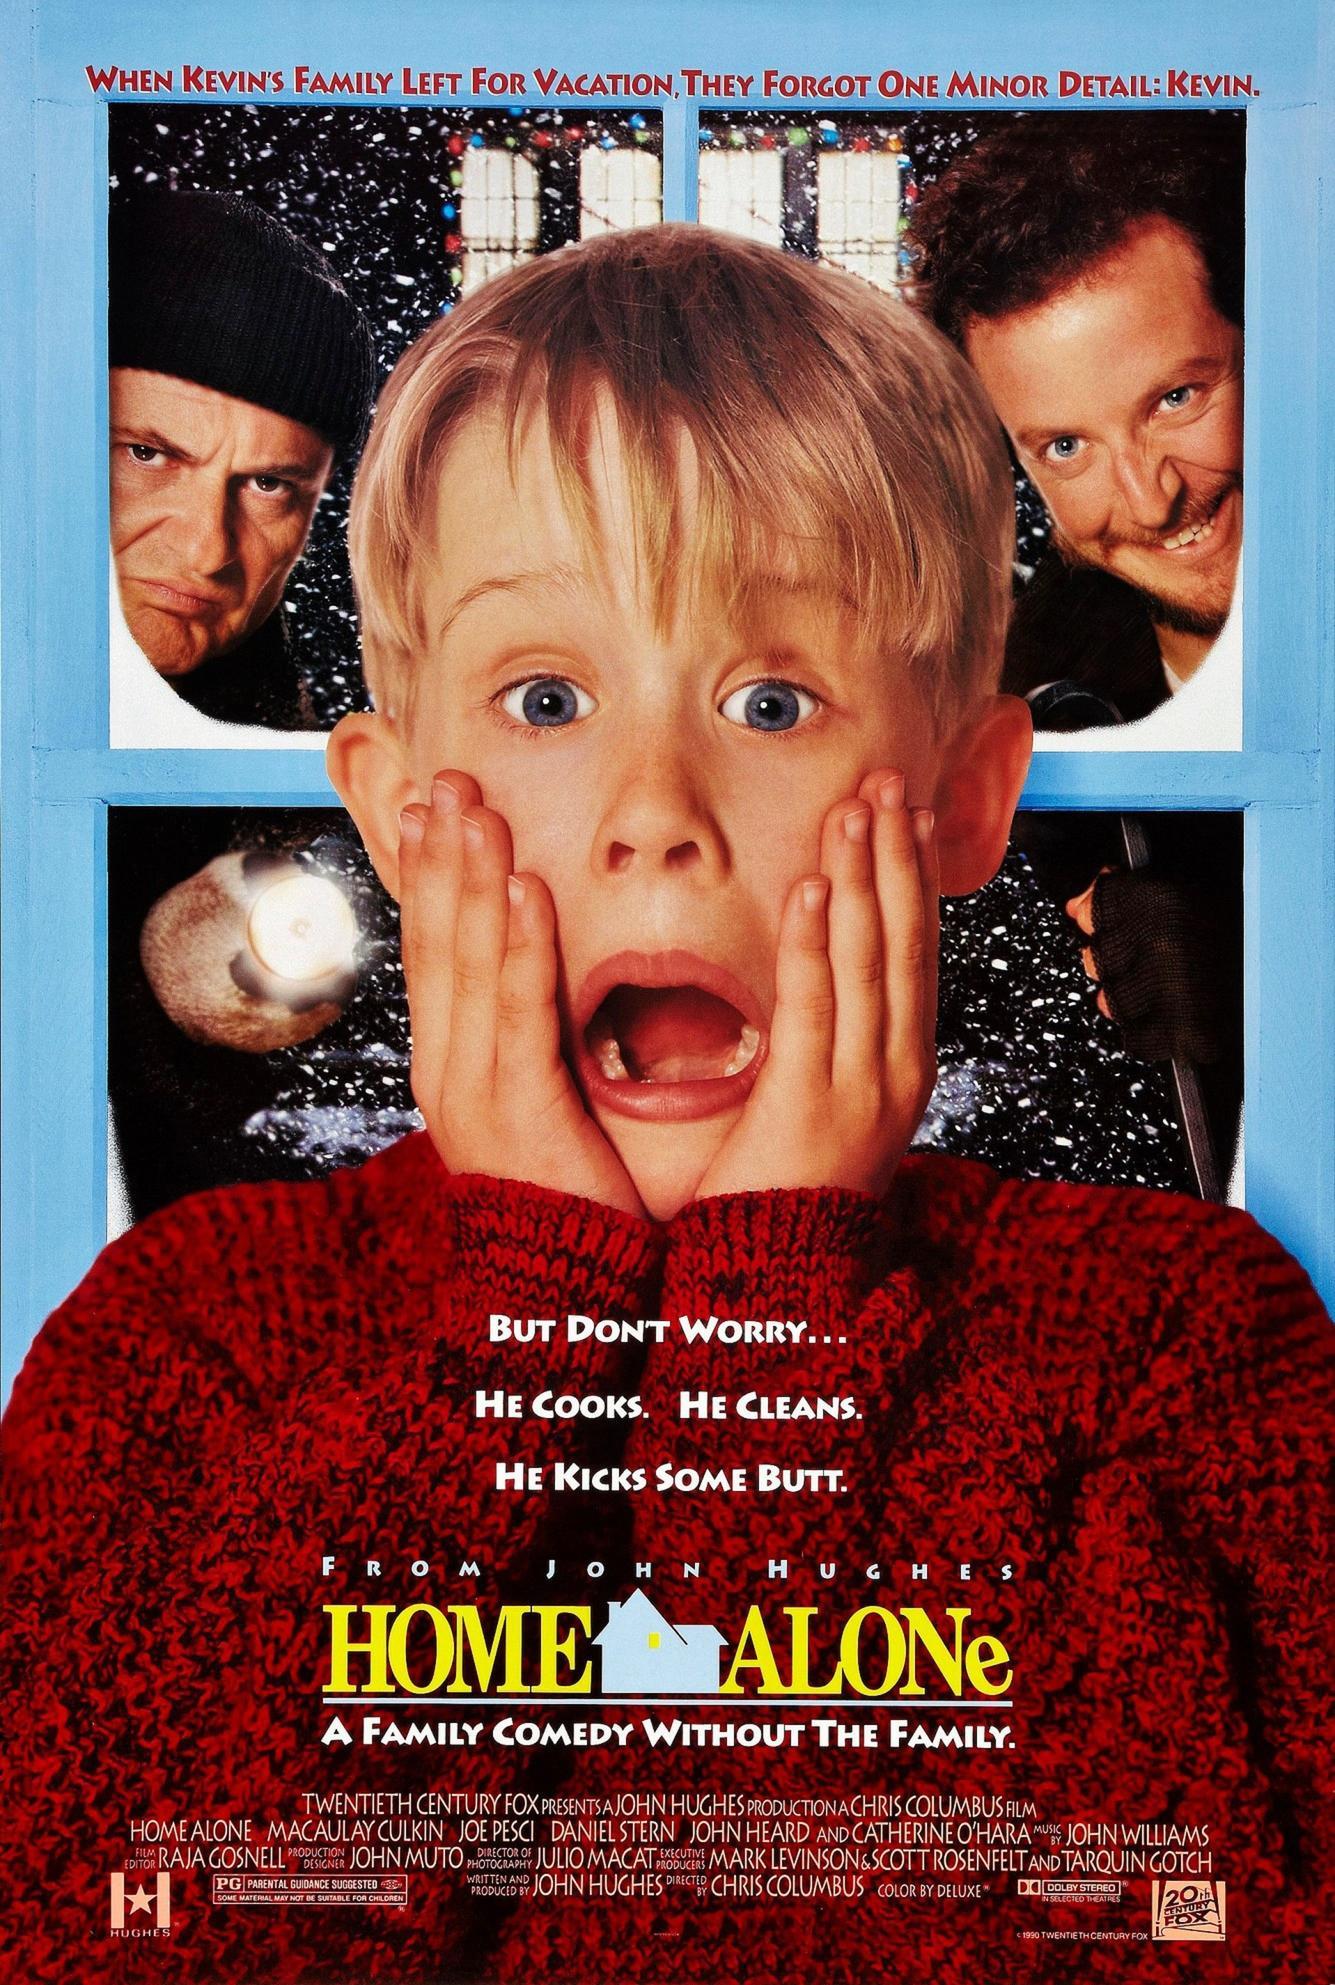 Macaulay Culkin shot to stardom in Home Alone, a film portraying a family much like our own. When the McAllister family embarks on a holiday to Paris, they unintentionally leave young Kevin behind, who must fend for himself. 